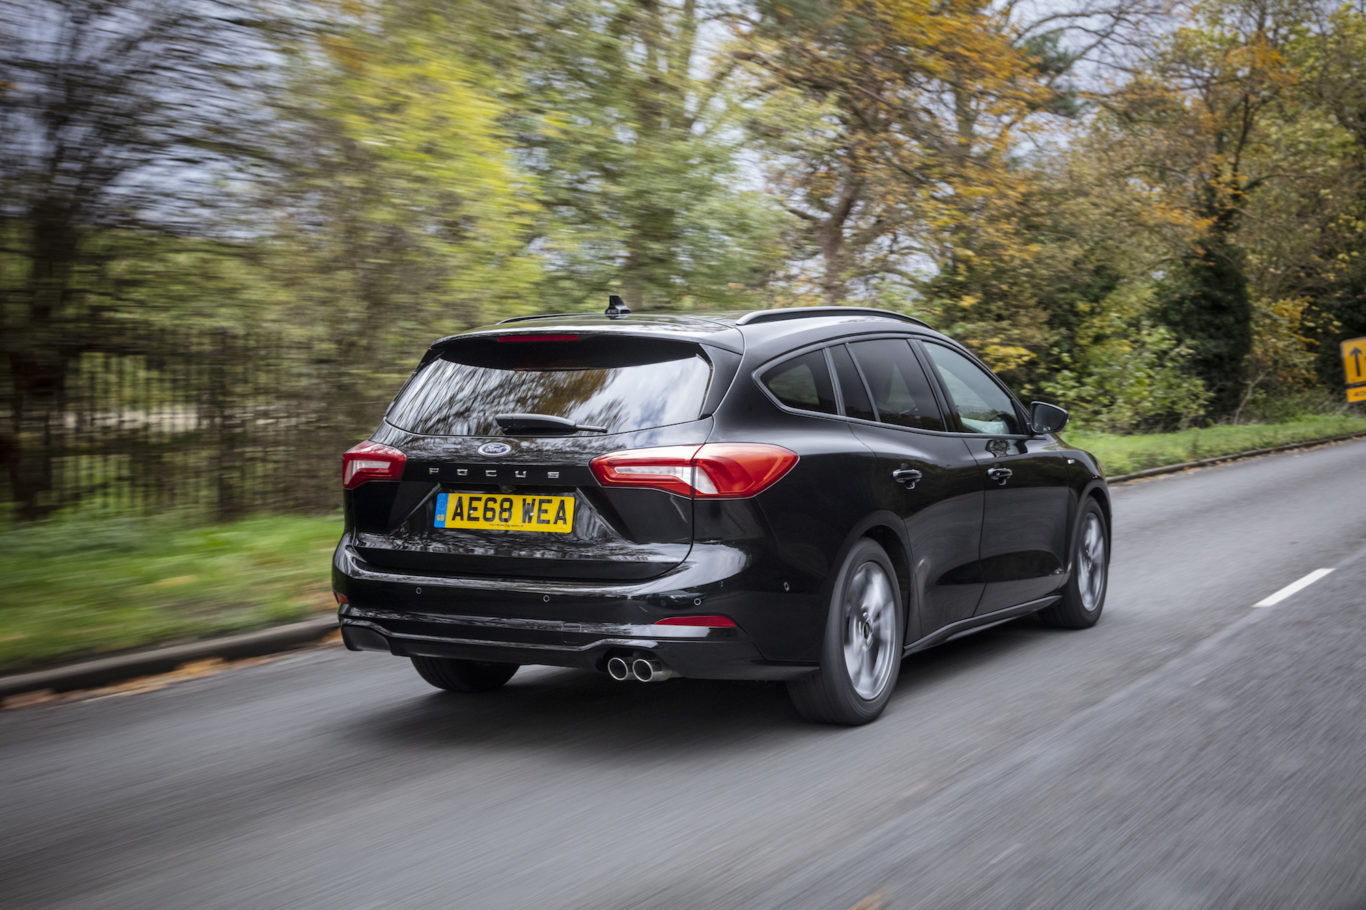 The excellent handling of the regular Focus has been carried on to the estate